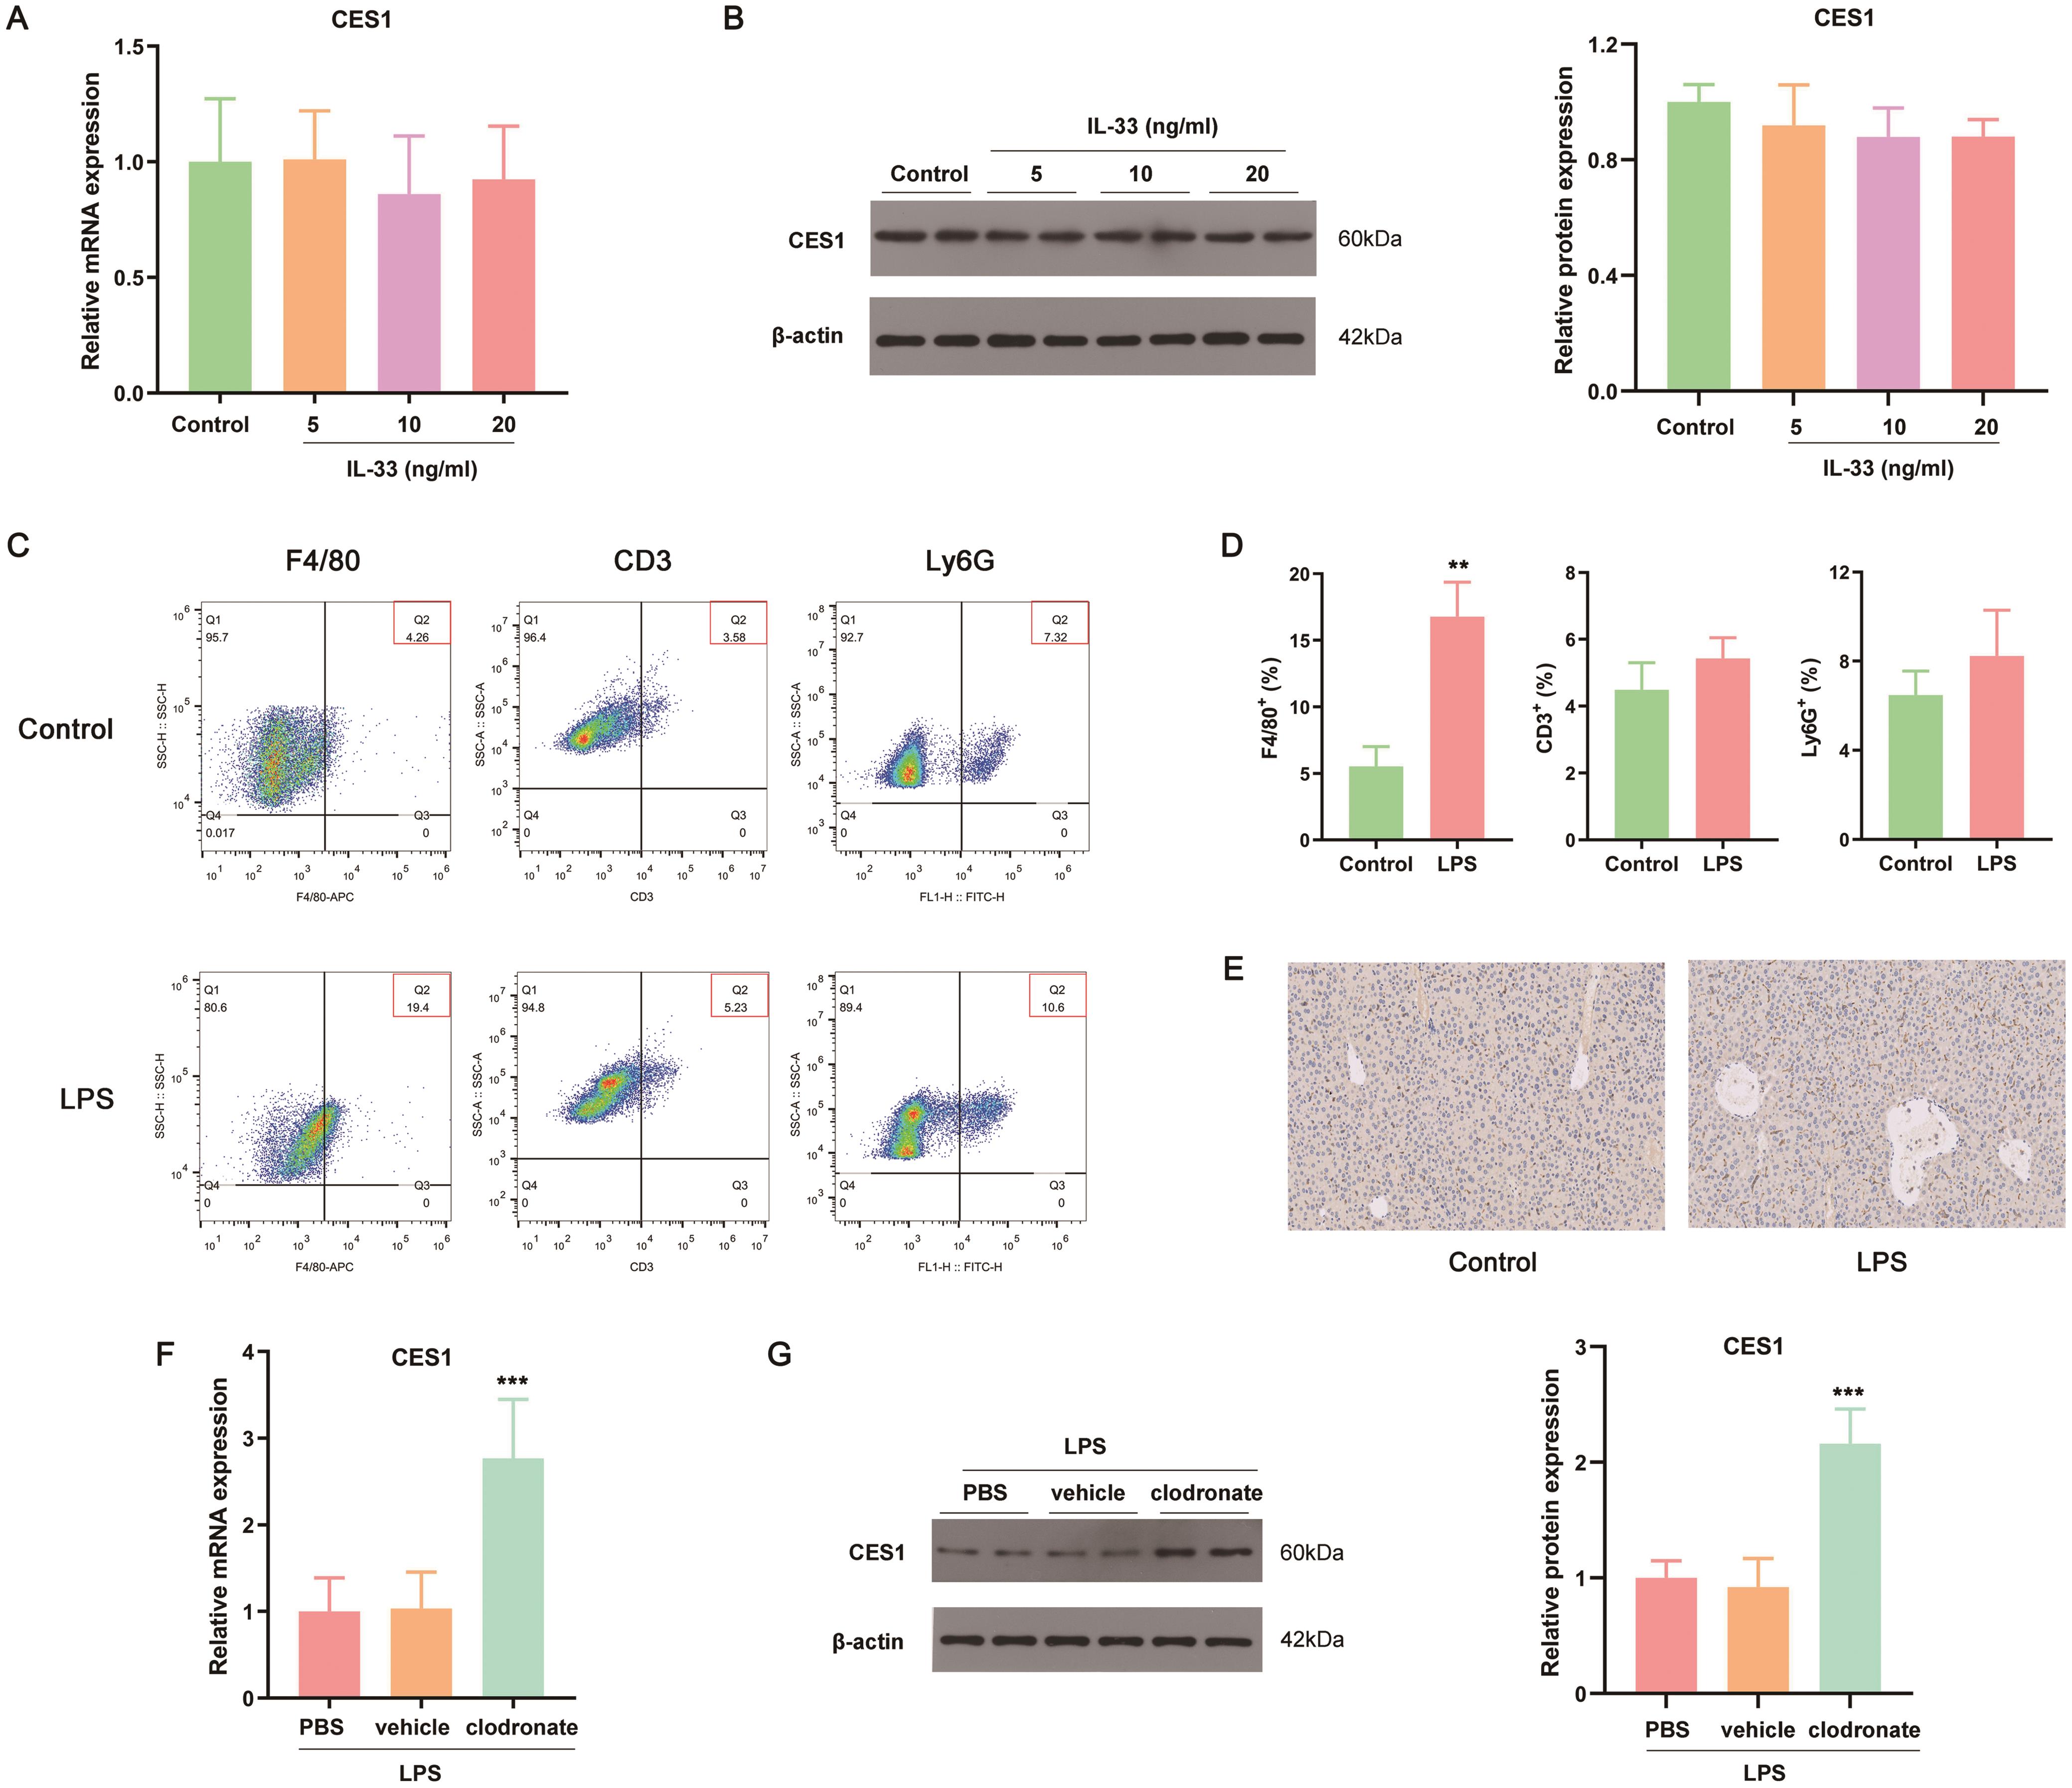 Macrophage mediates the downregulation of hepatic CES1 by IL-33.